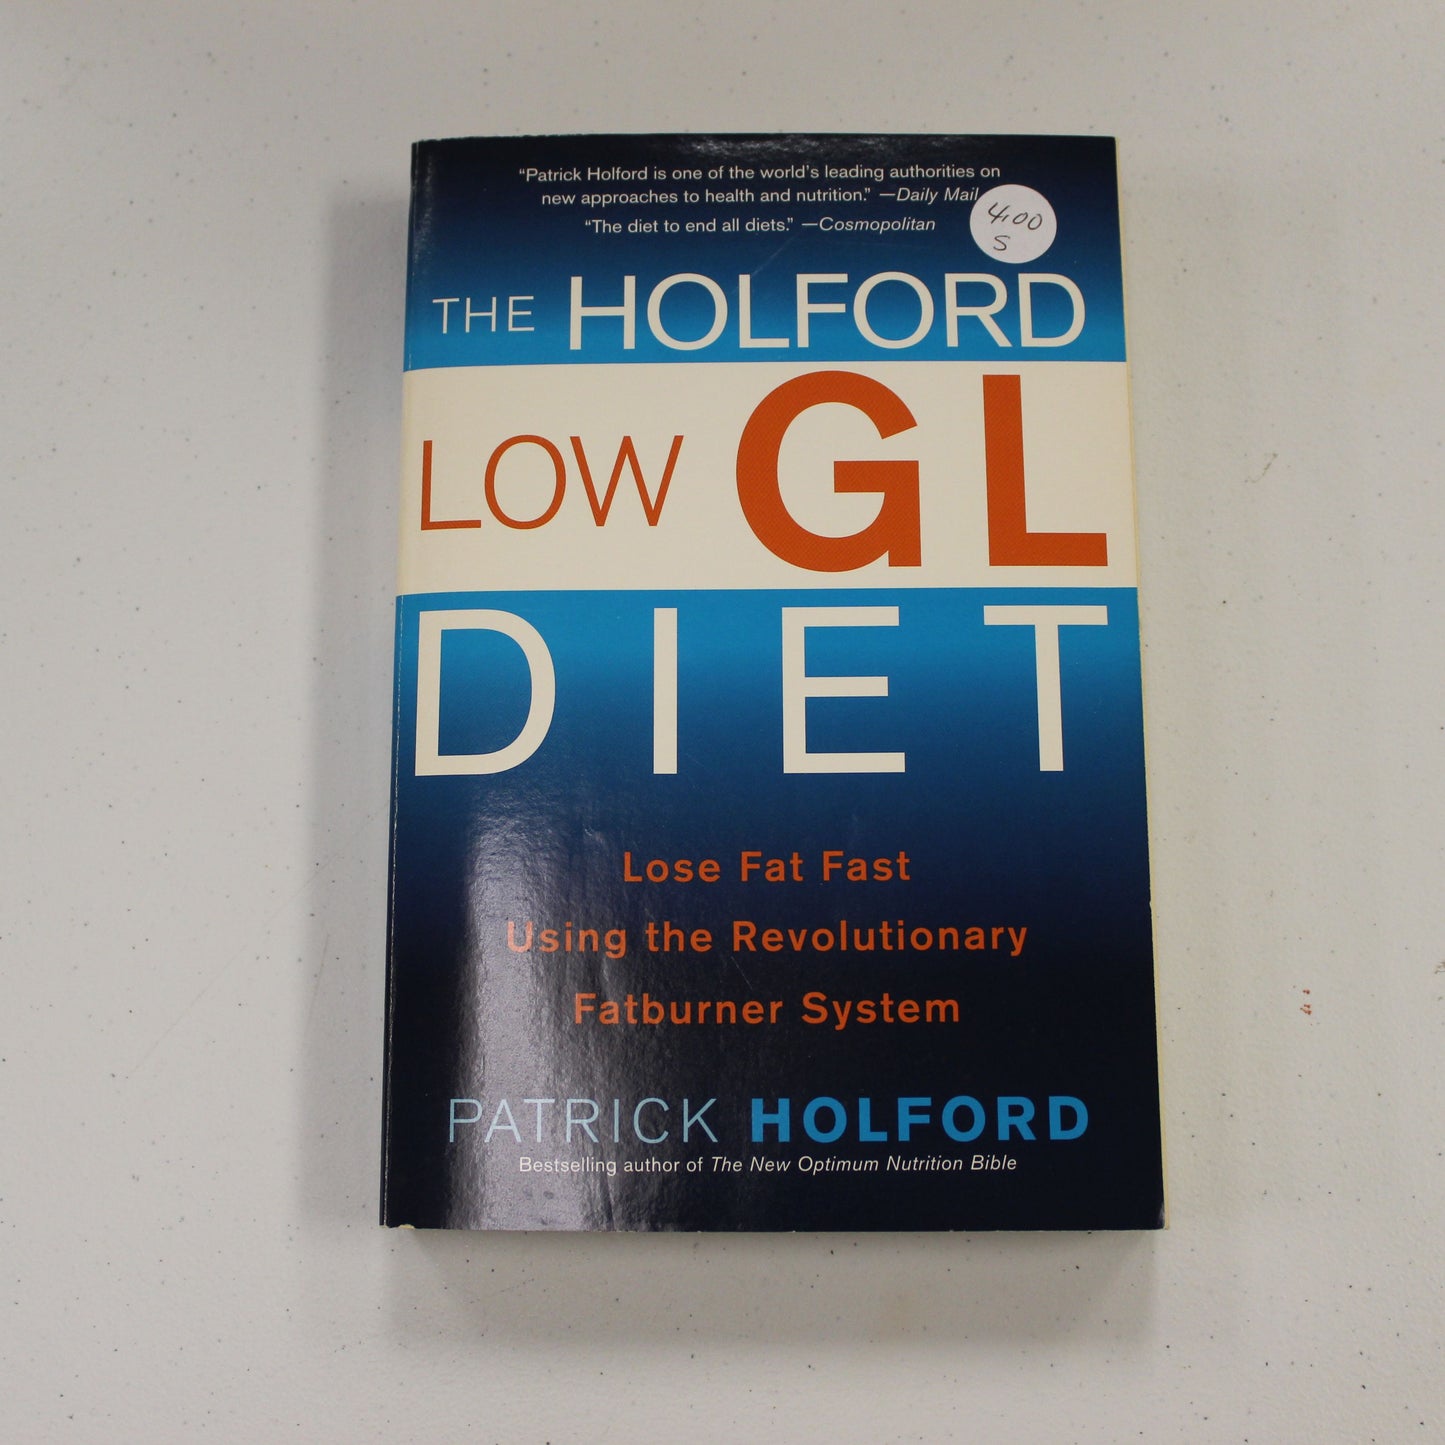 THE HOLFORD LOW GL DIET